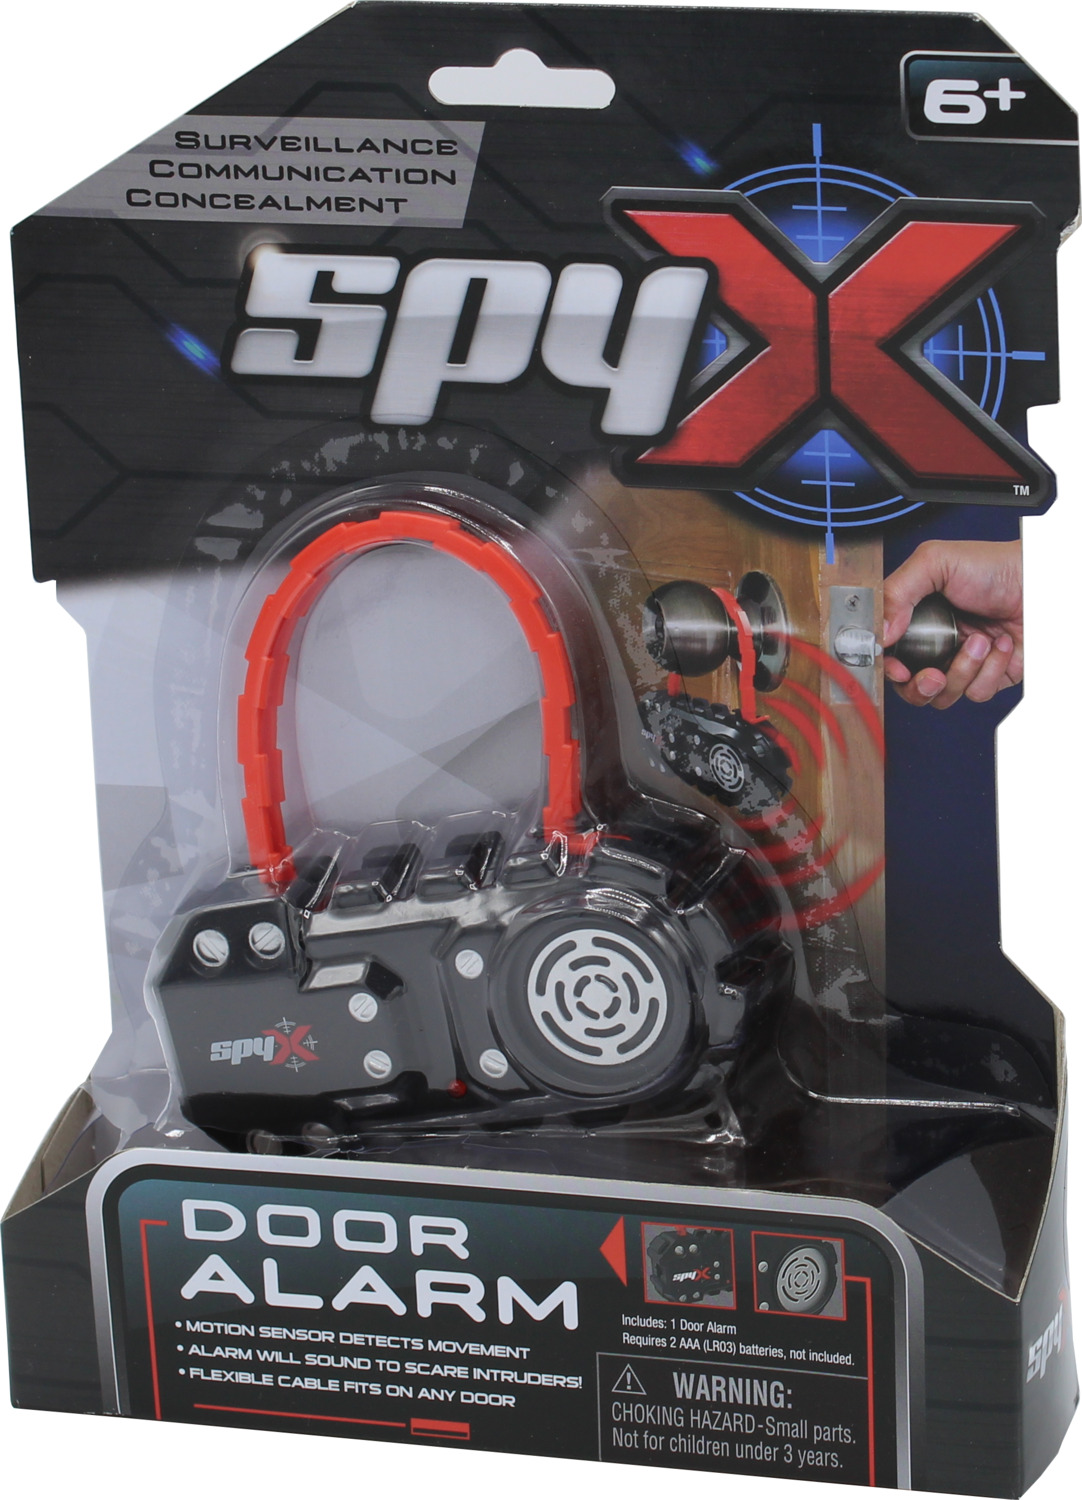 SpyX Door Alarm Monitor Detector That Protect Your Stuff & Scare Away Intruder 